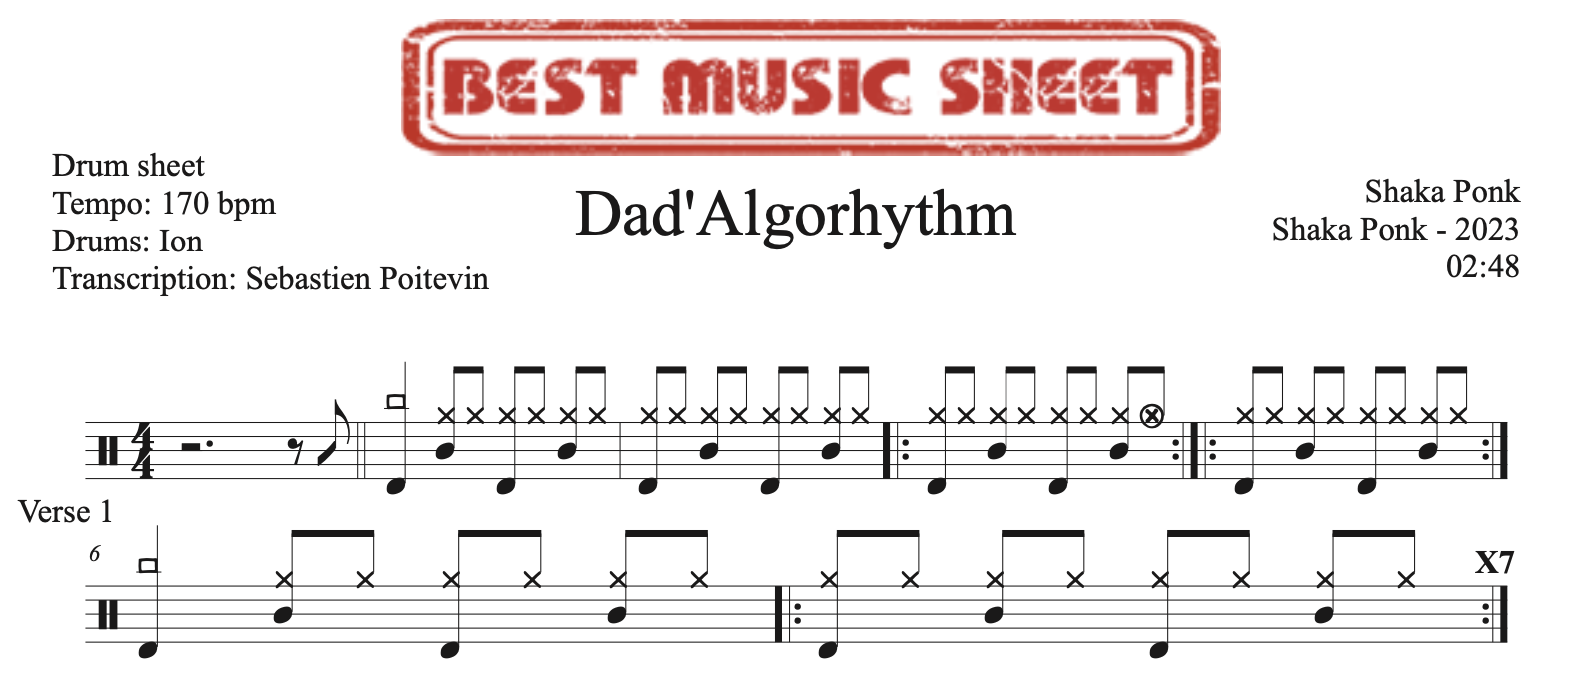 sample of the drum sheet of Dad’Algorhythm by Shaka Ponk